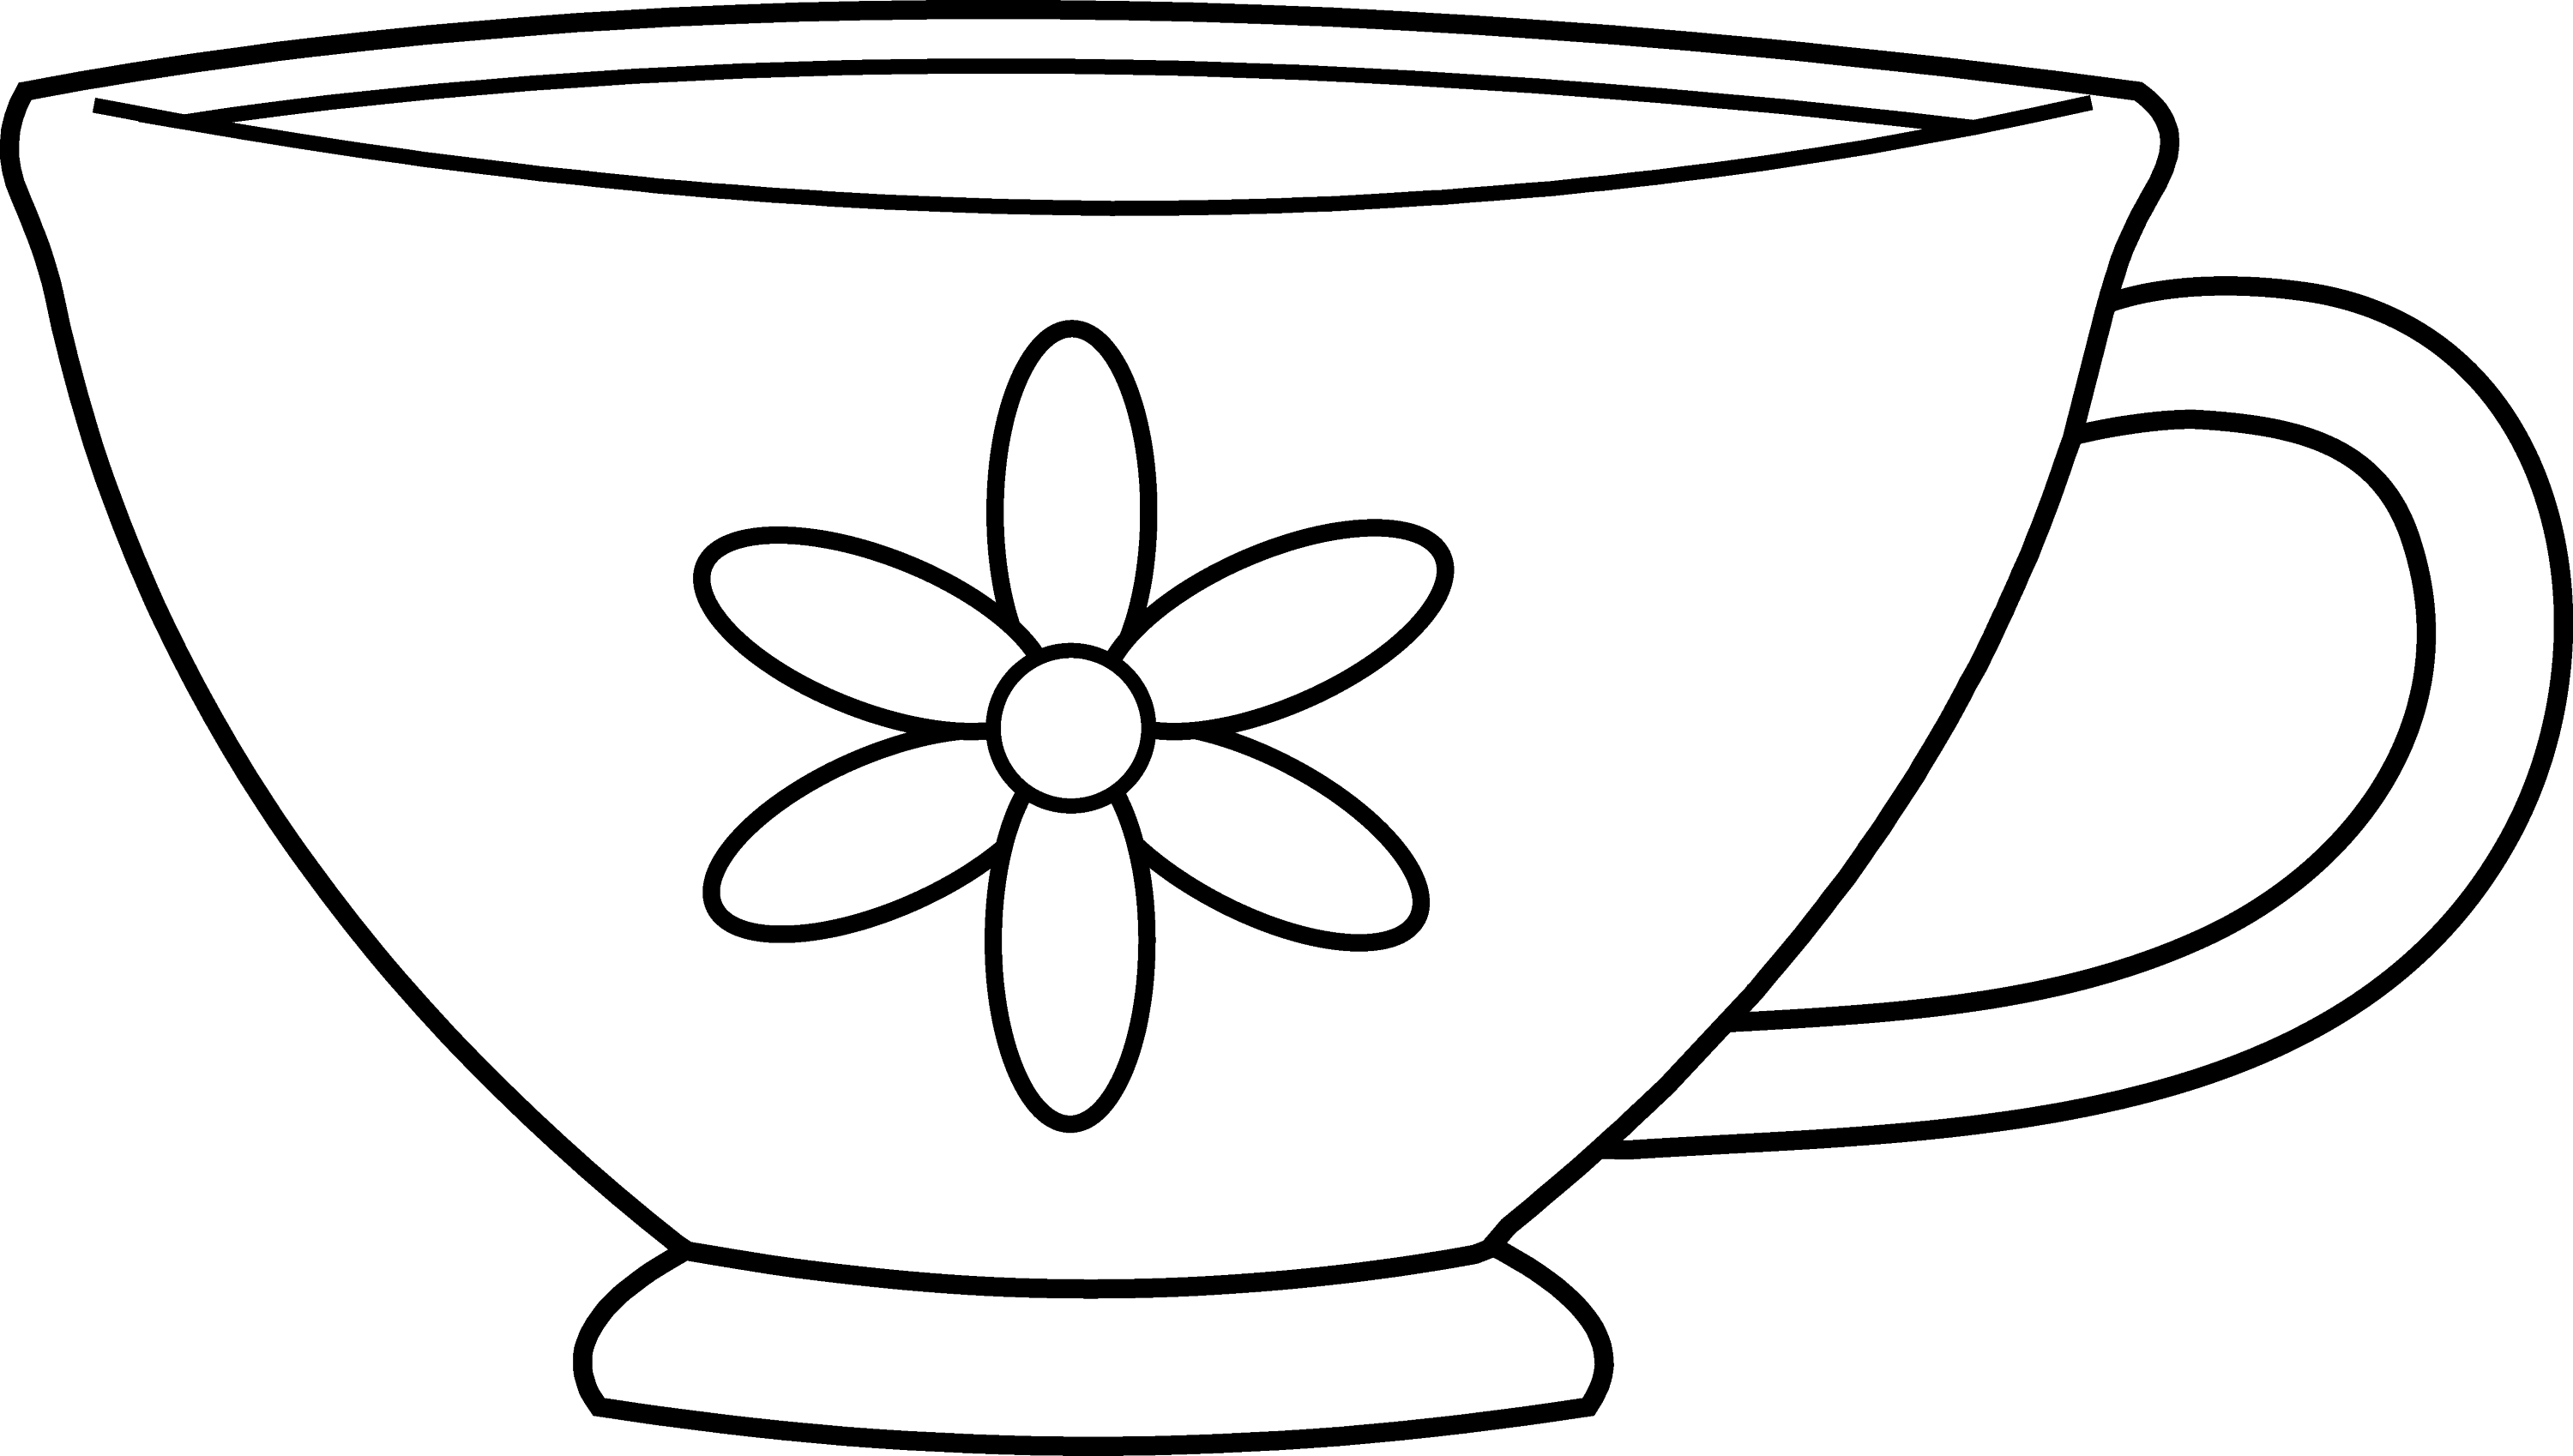 Cute Teacup Coloring Page Free Clip Art